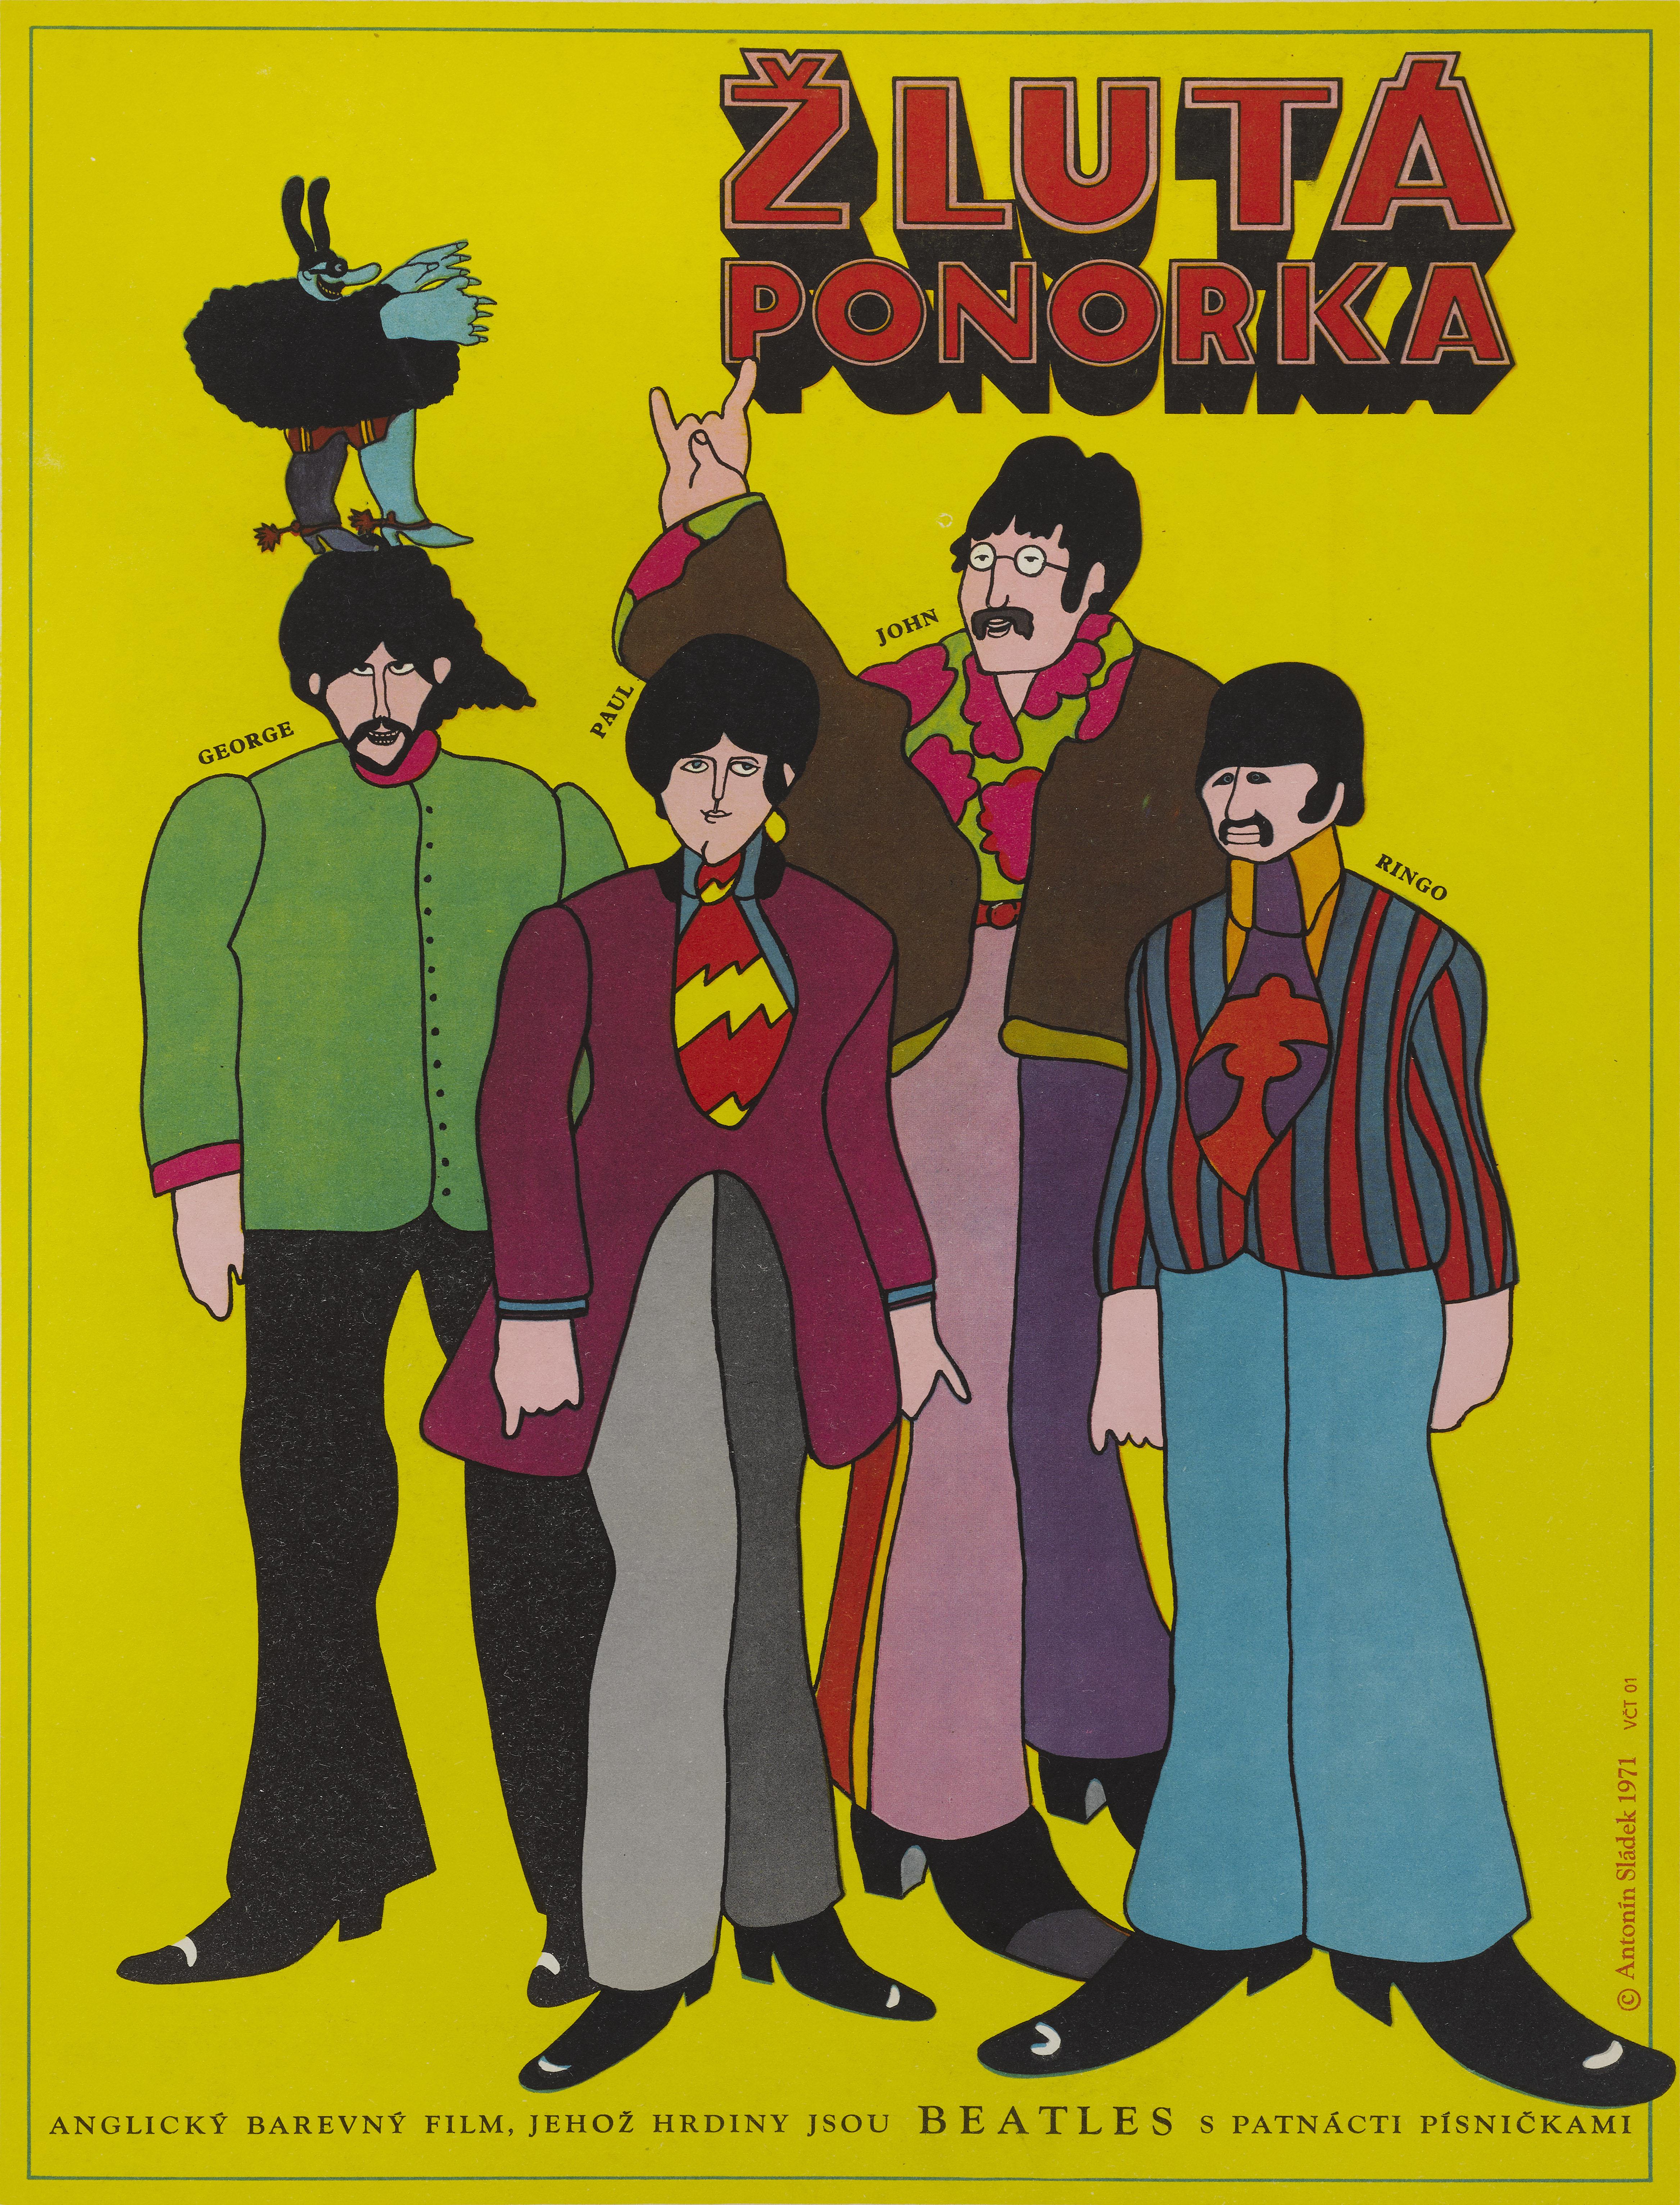 Original Czechoslovakian film poster for the 1968 Beatles animation film Yellow Submarine.
This extremely cool poster was designed by the Czech artist Antonin Sladek, (1942-2009)
This poster is from the films first Czech release in 1971.
This